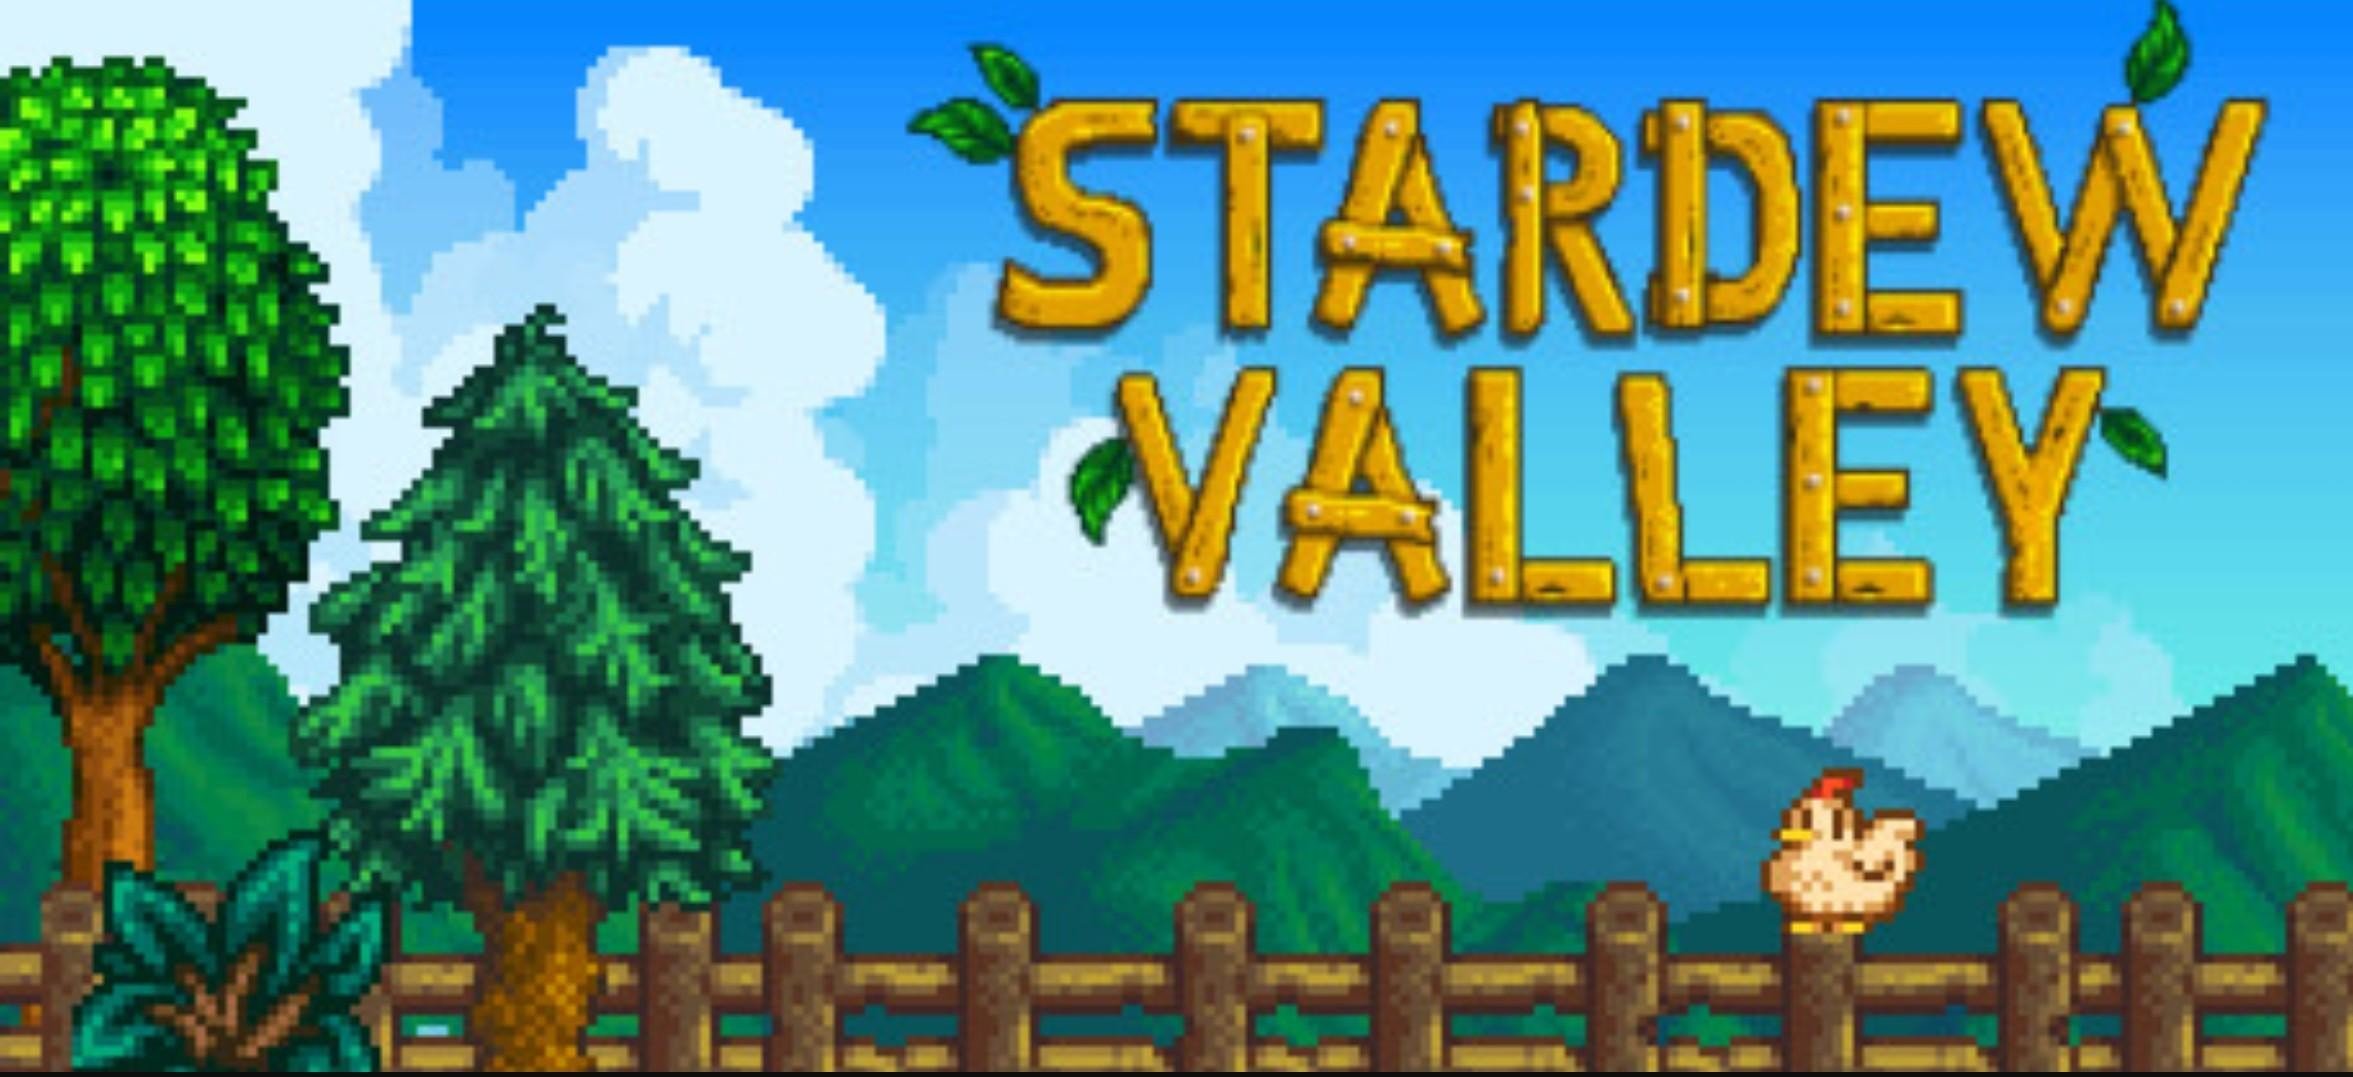 Review Starded Valley With Rezzafrizza Steemkr